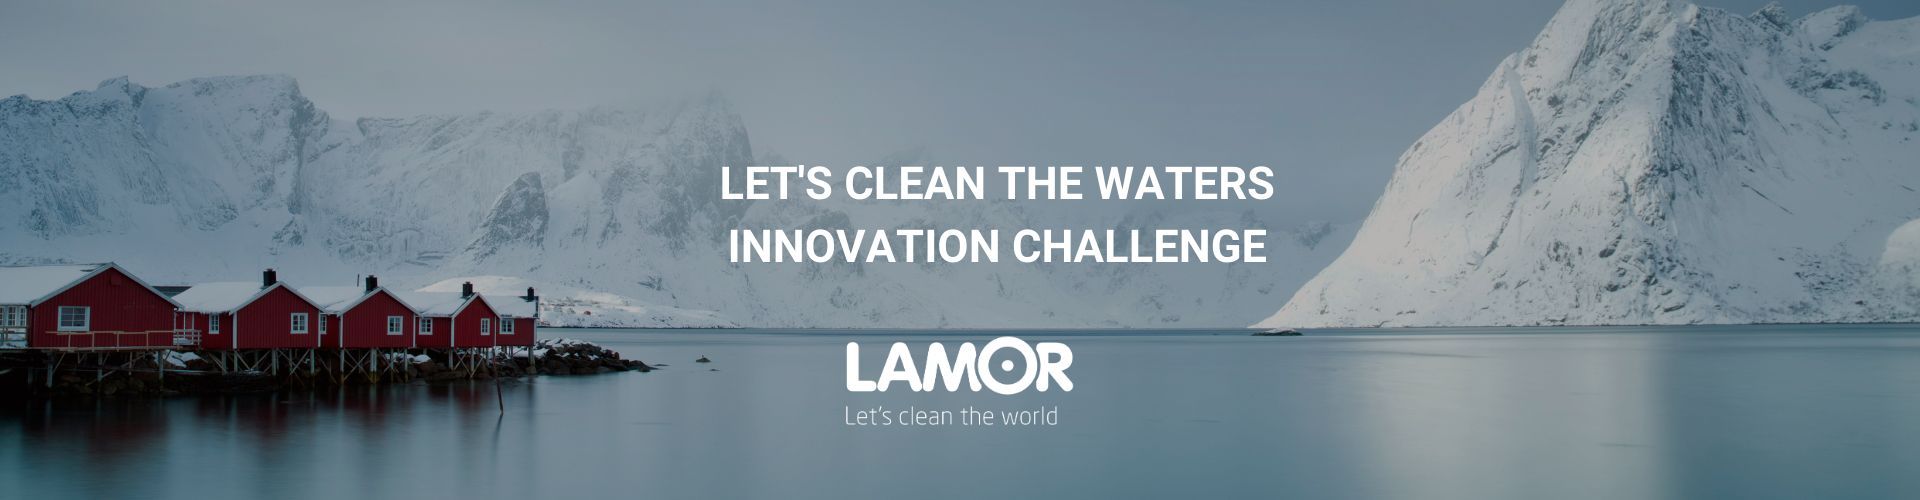 LET'S CLEAN THE WATERS INNOVATION CHALLENGE